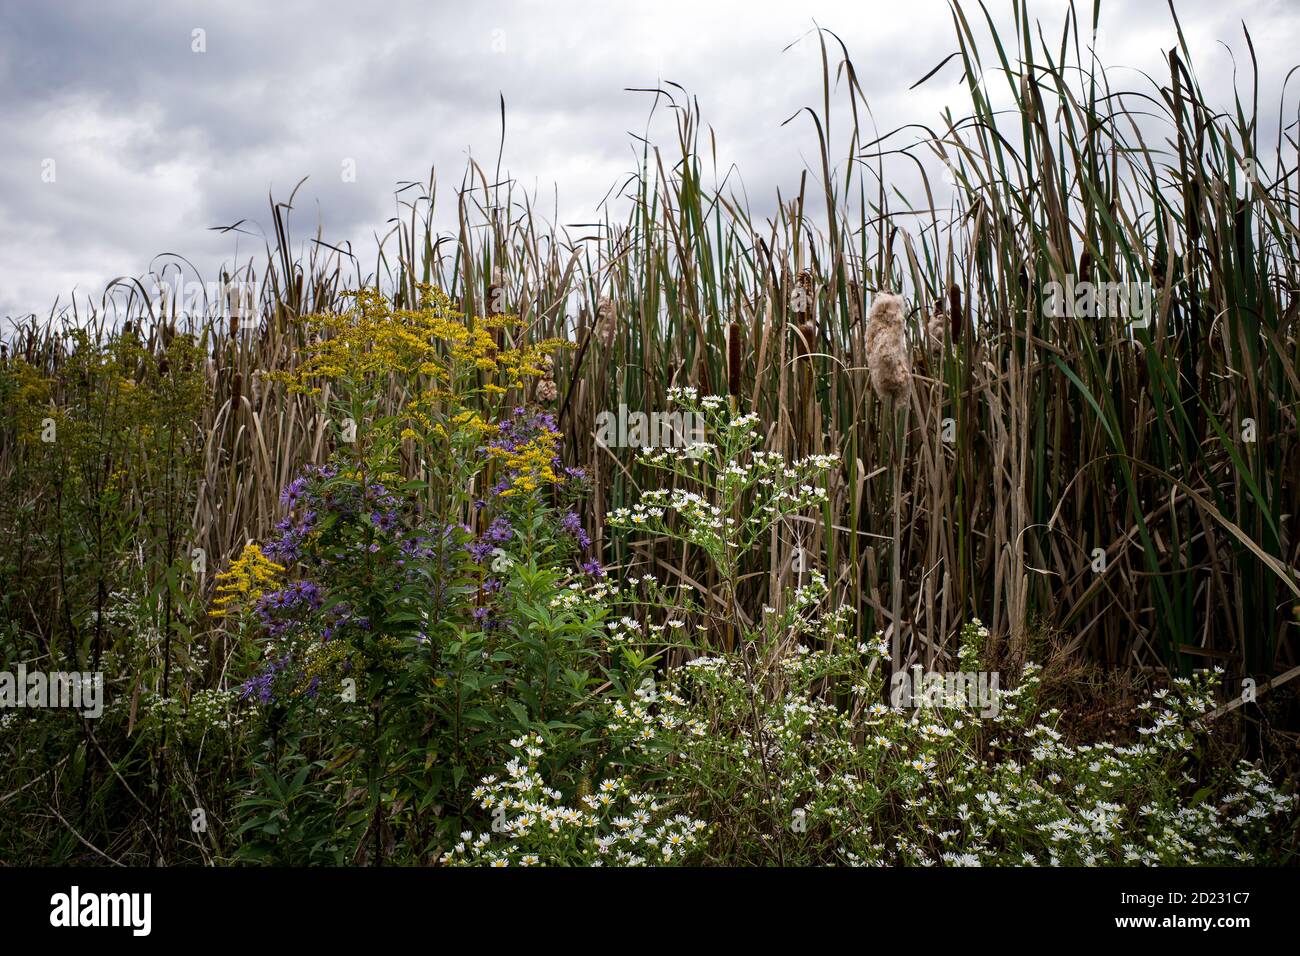 Wetlands or marshlands with goldenrod, New England aster, hairy white oldfield aster, and cattails on an overcast autumn day. Stock Photo